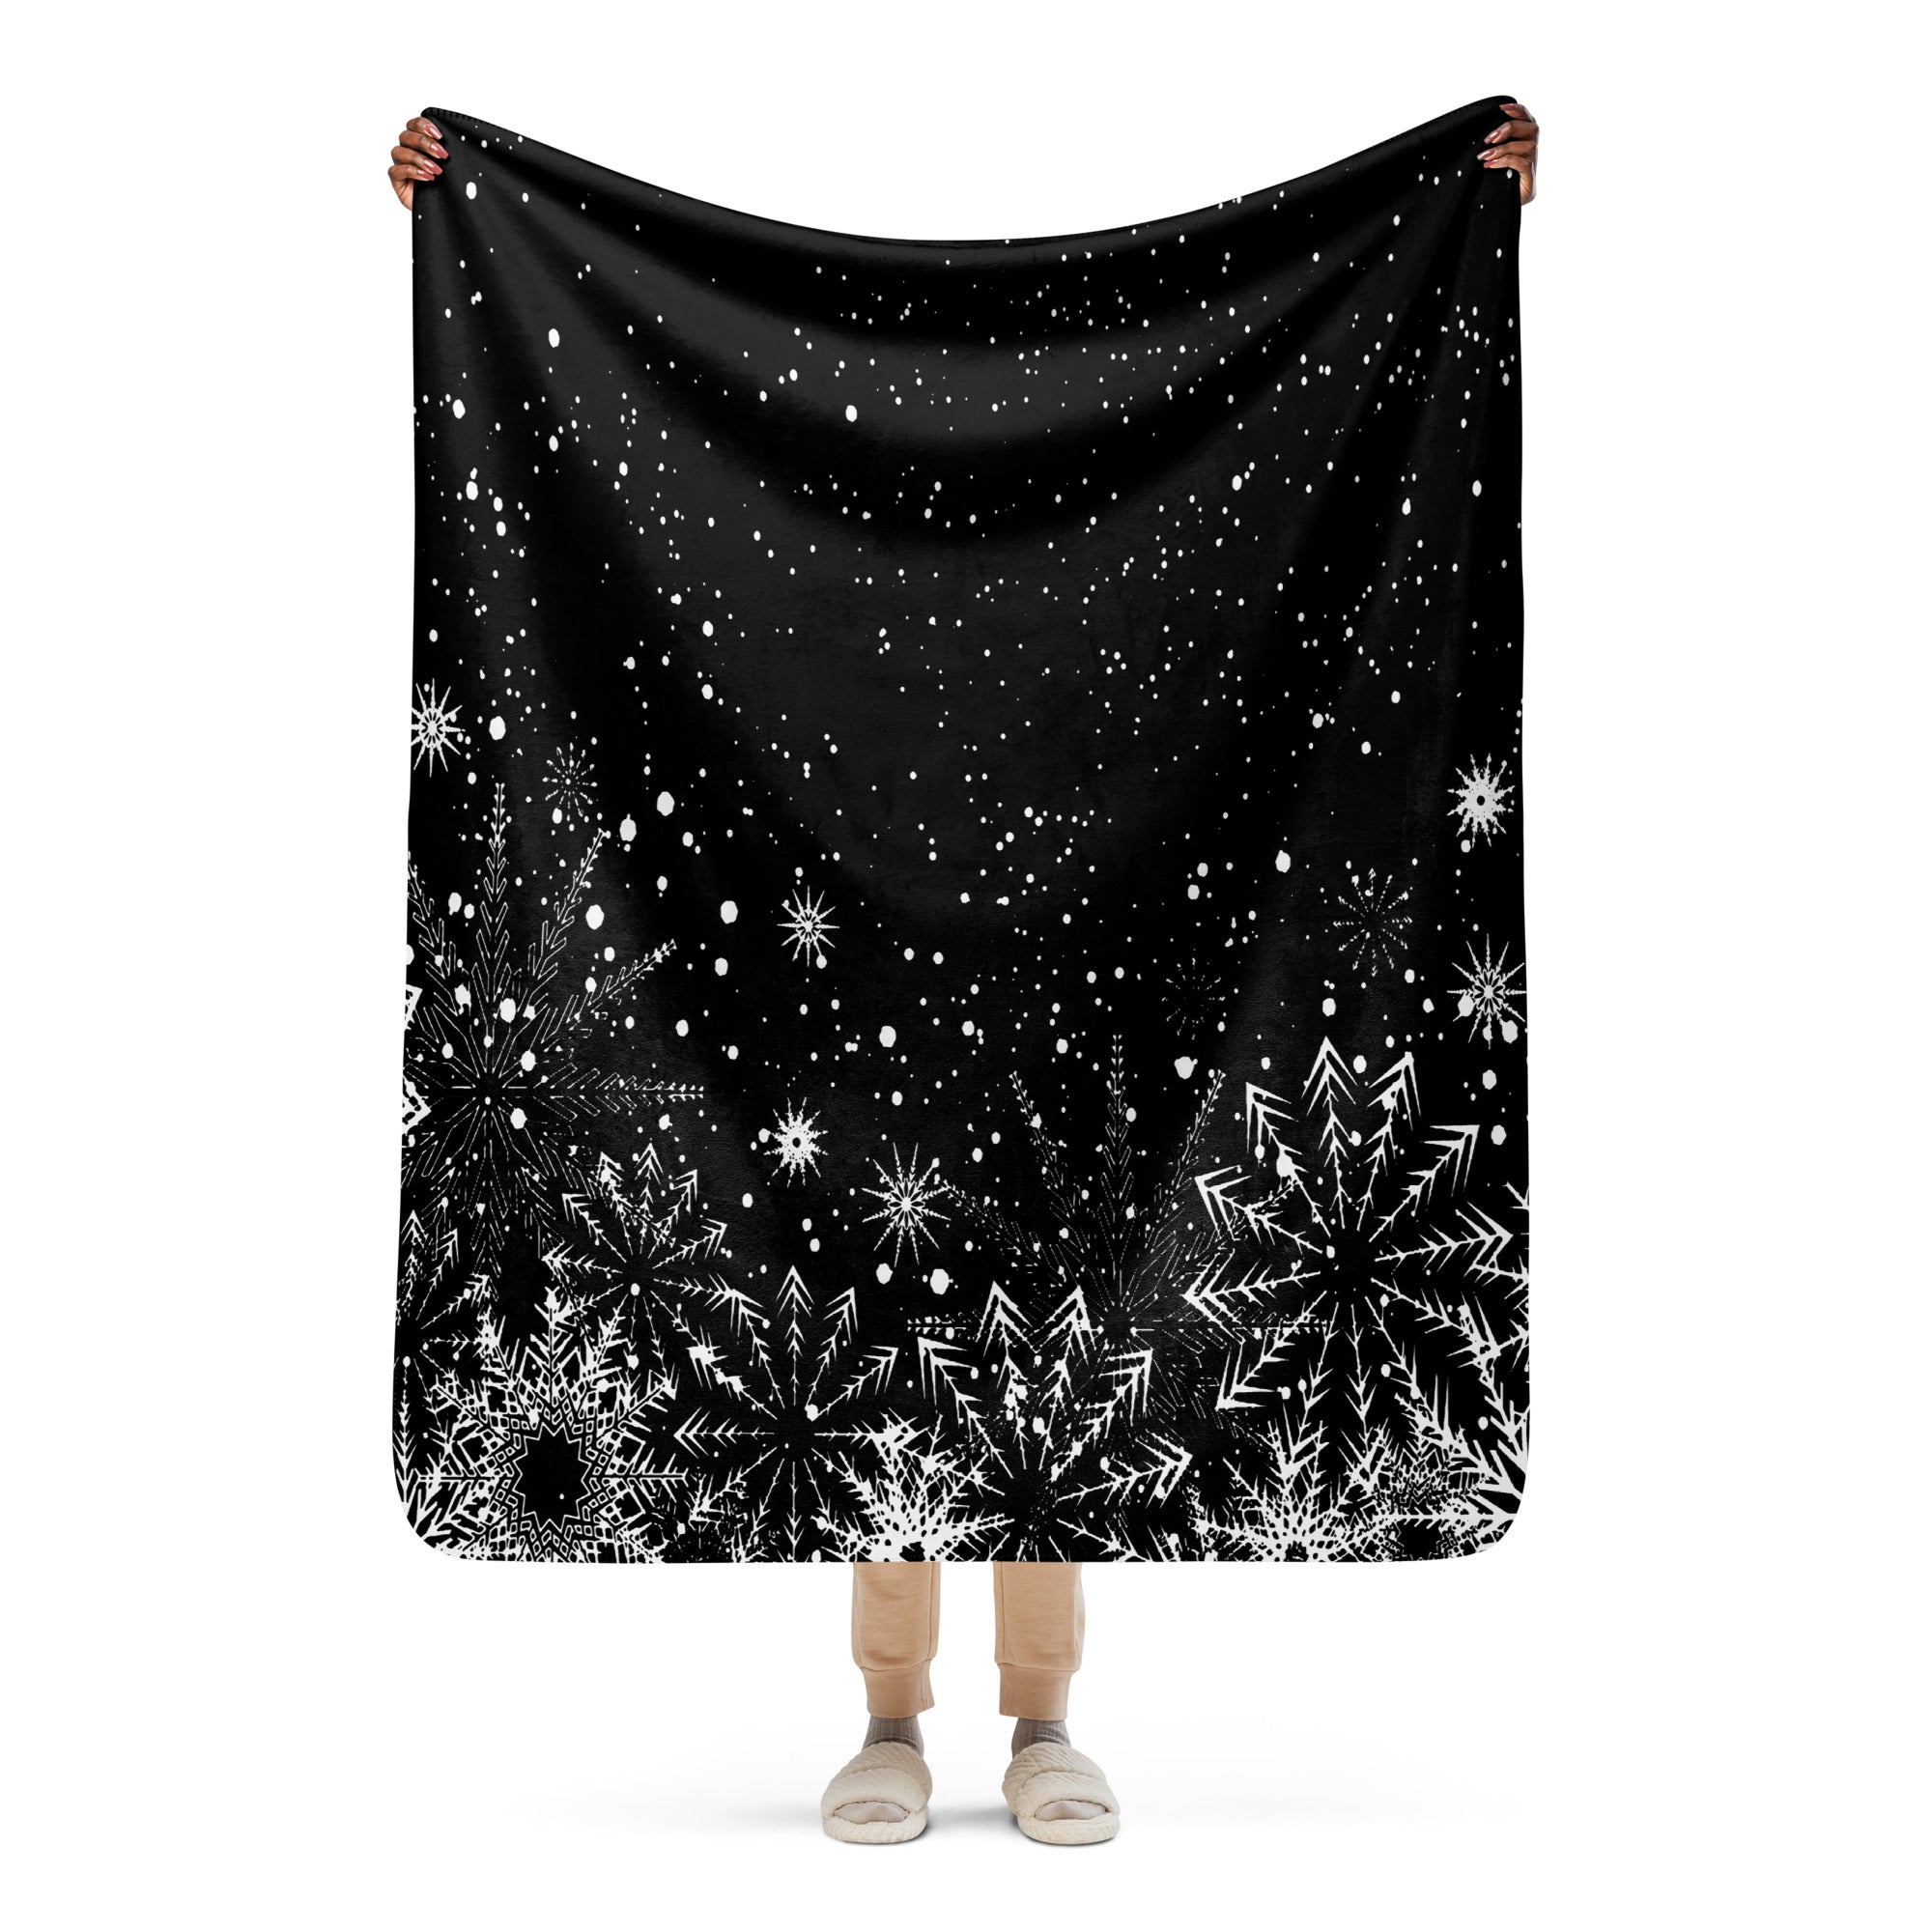 Black and White Snowflakes Sherpa blanket